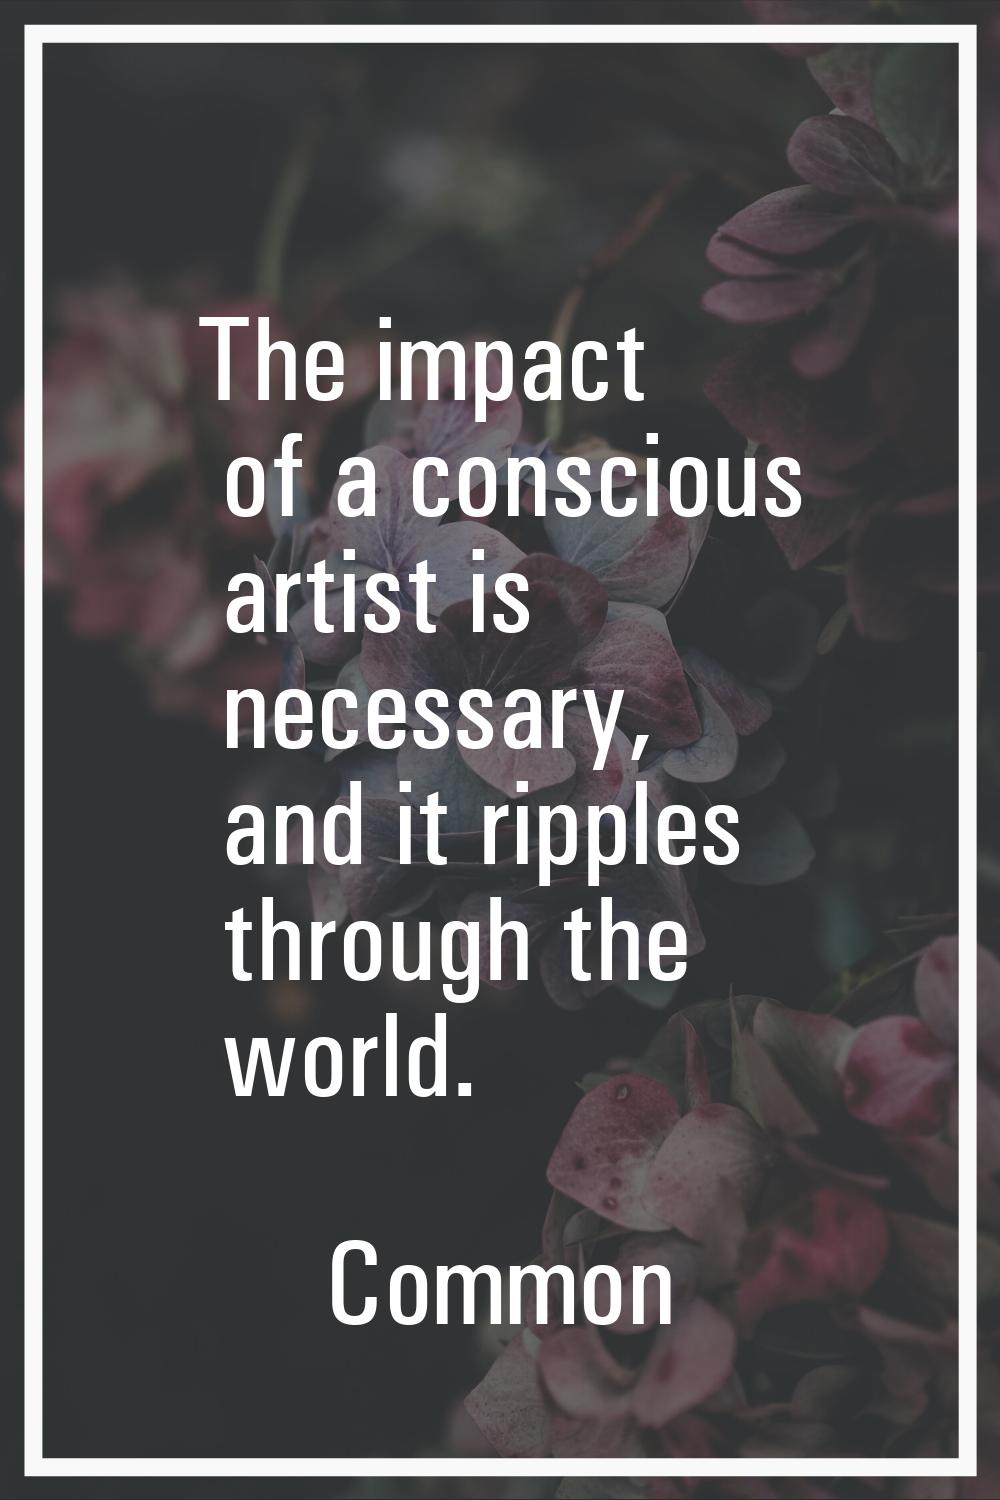 The impact of a conscious artist is necessary, and it ripples through the world.